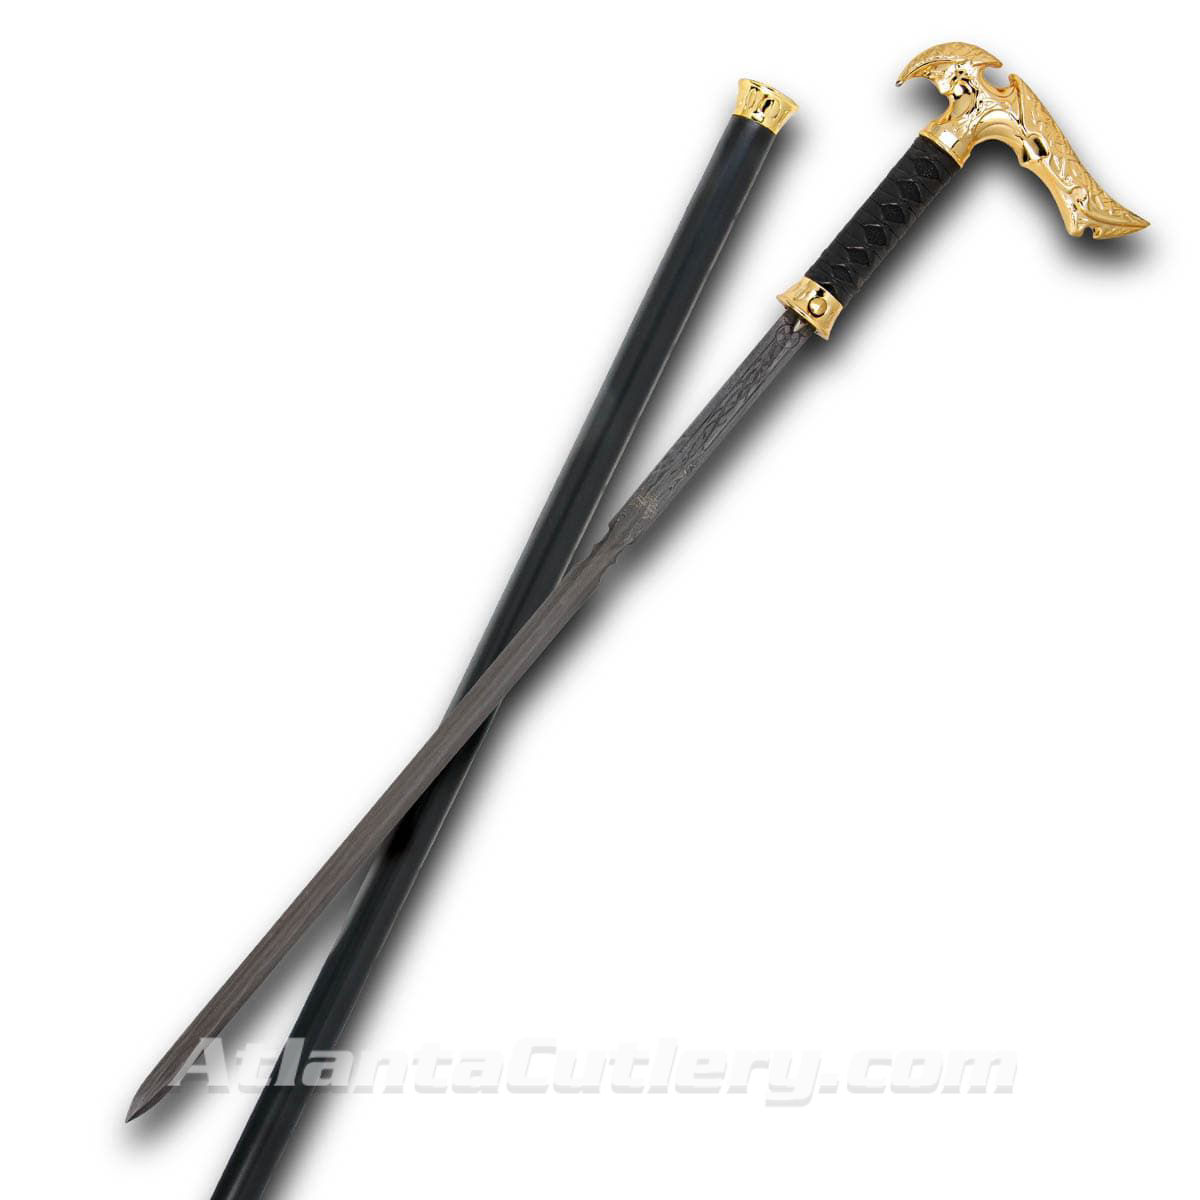 Kit Rae Sword Cane has a sharp high carbon steel blade, hardwood shaft and gold plated handle accented with ray skin and leather